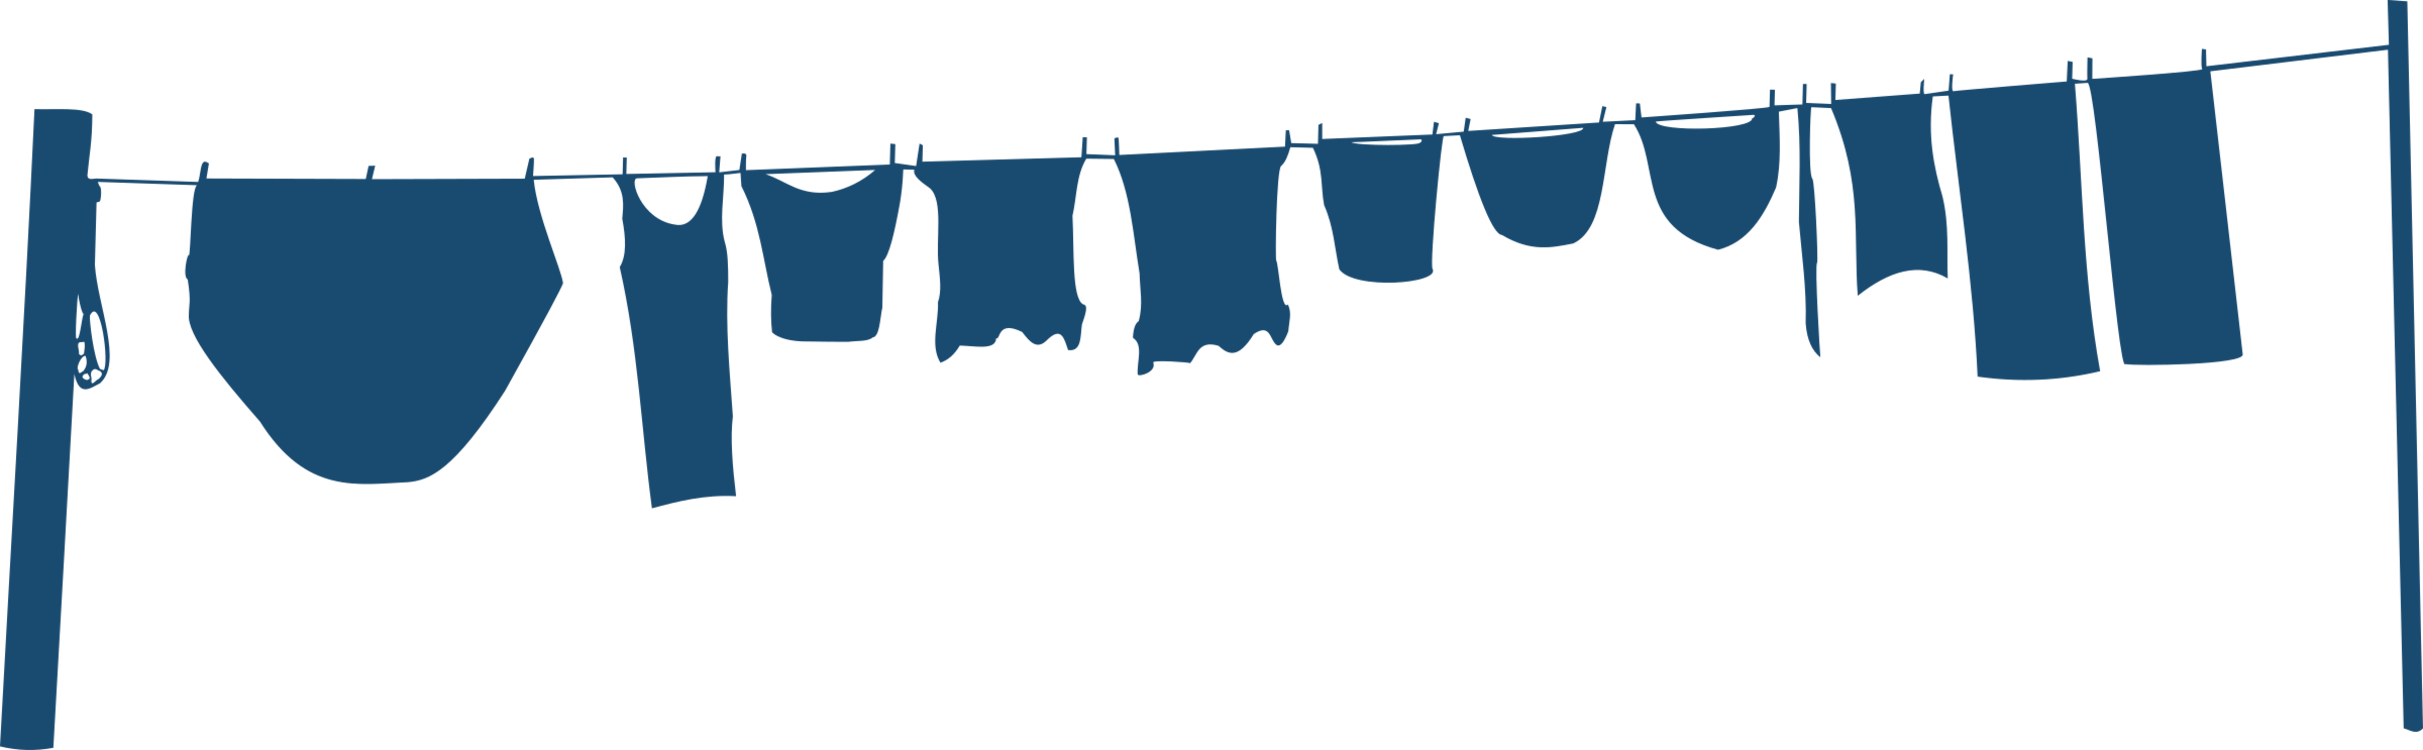 Clothespin clipart laundry line. Png royalty free svg